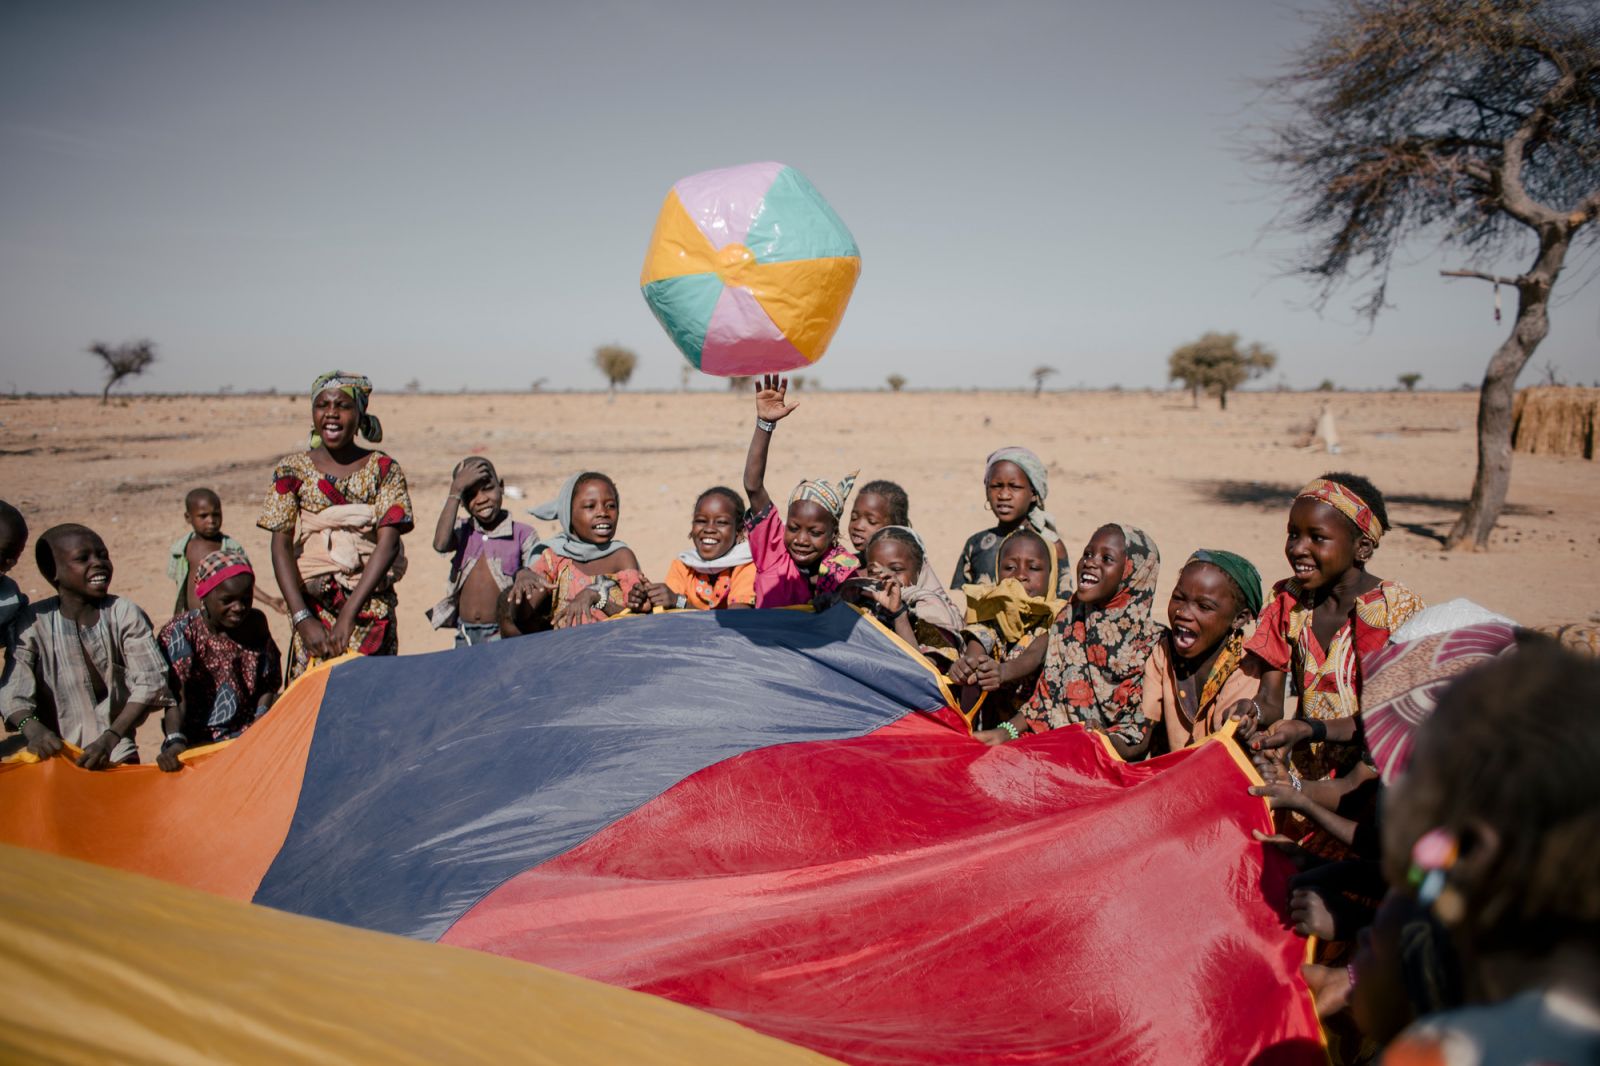 CARE is providing psychosocial support to children in Niger by bringing laughs and fun to those affected by the Diffa crisis. Photo: Ollivier Girard